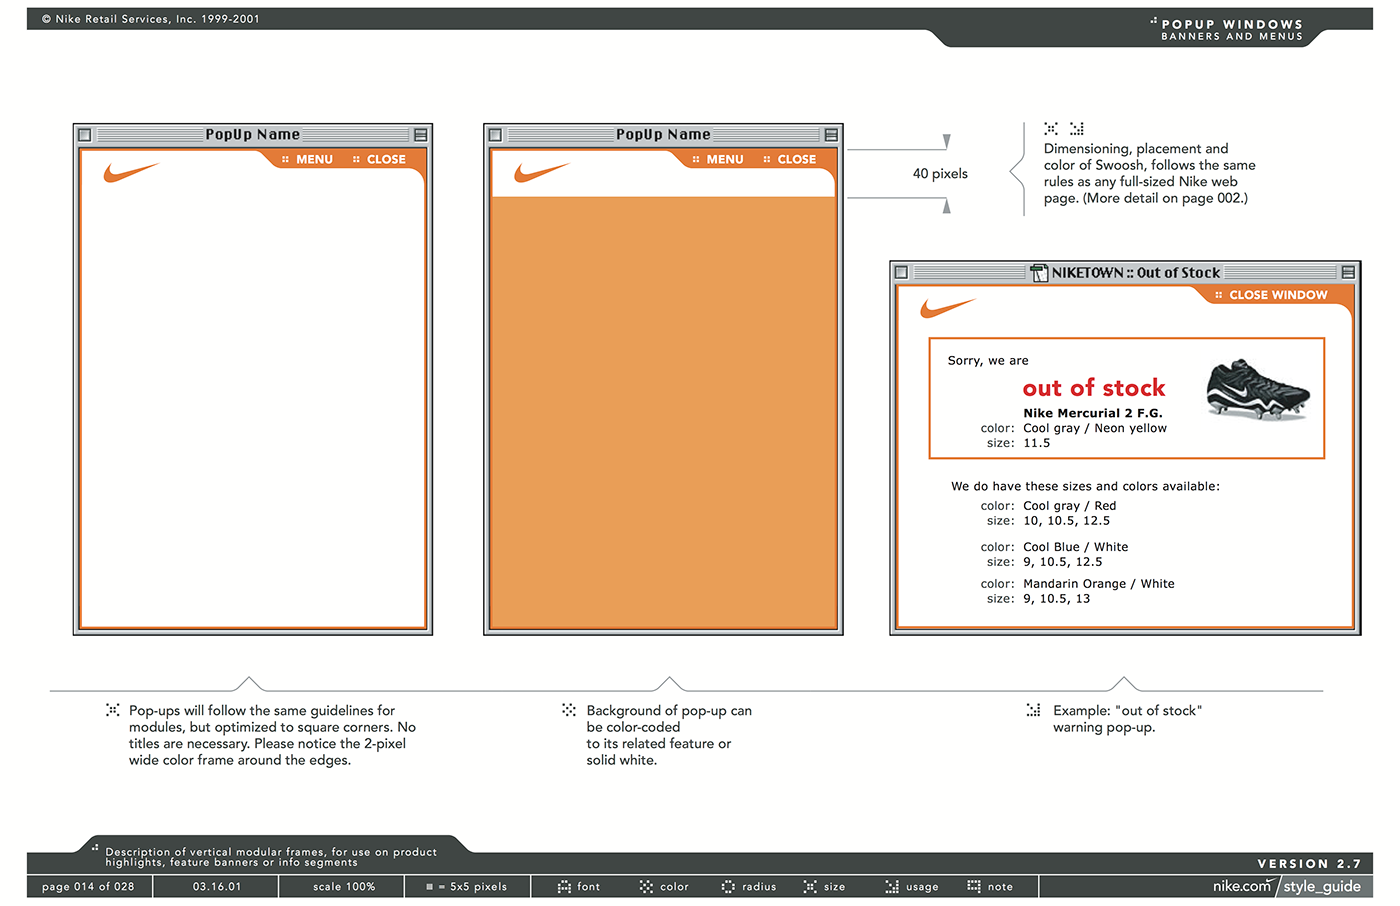 Nike Style Guide guidelines